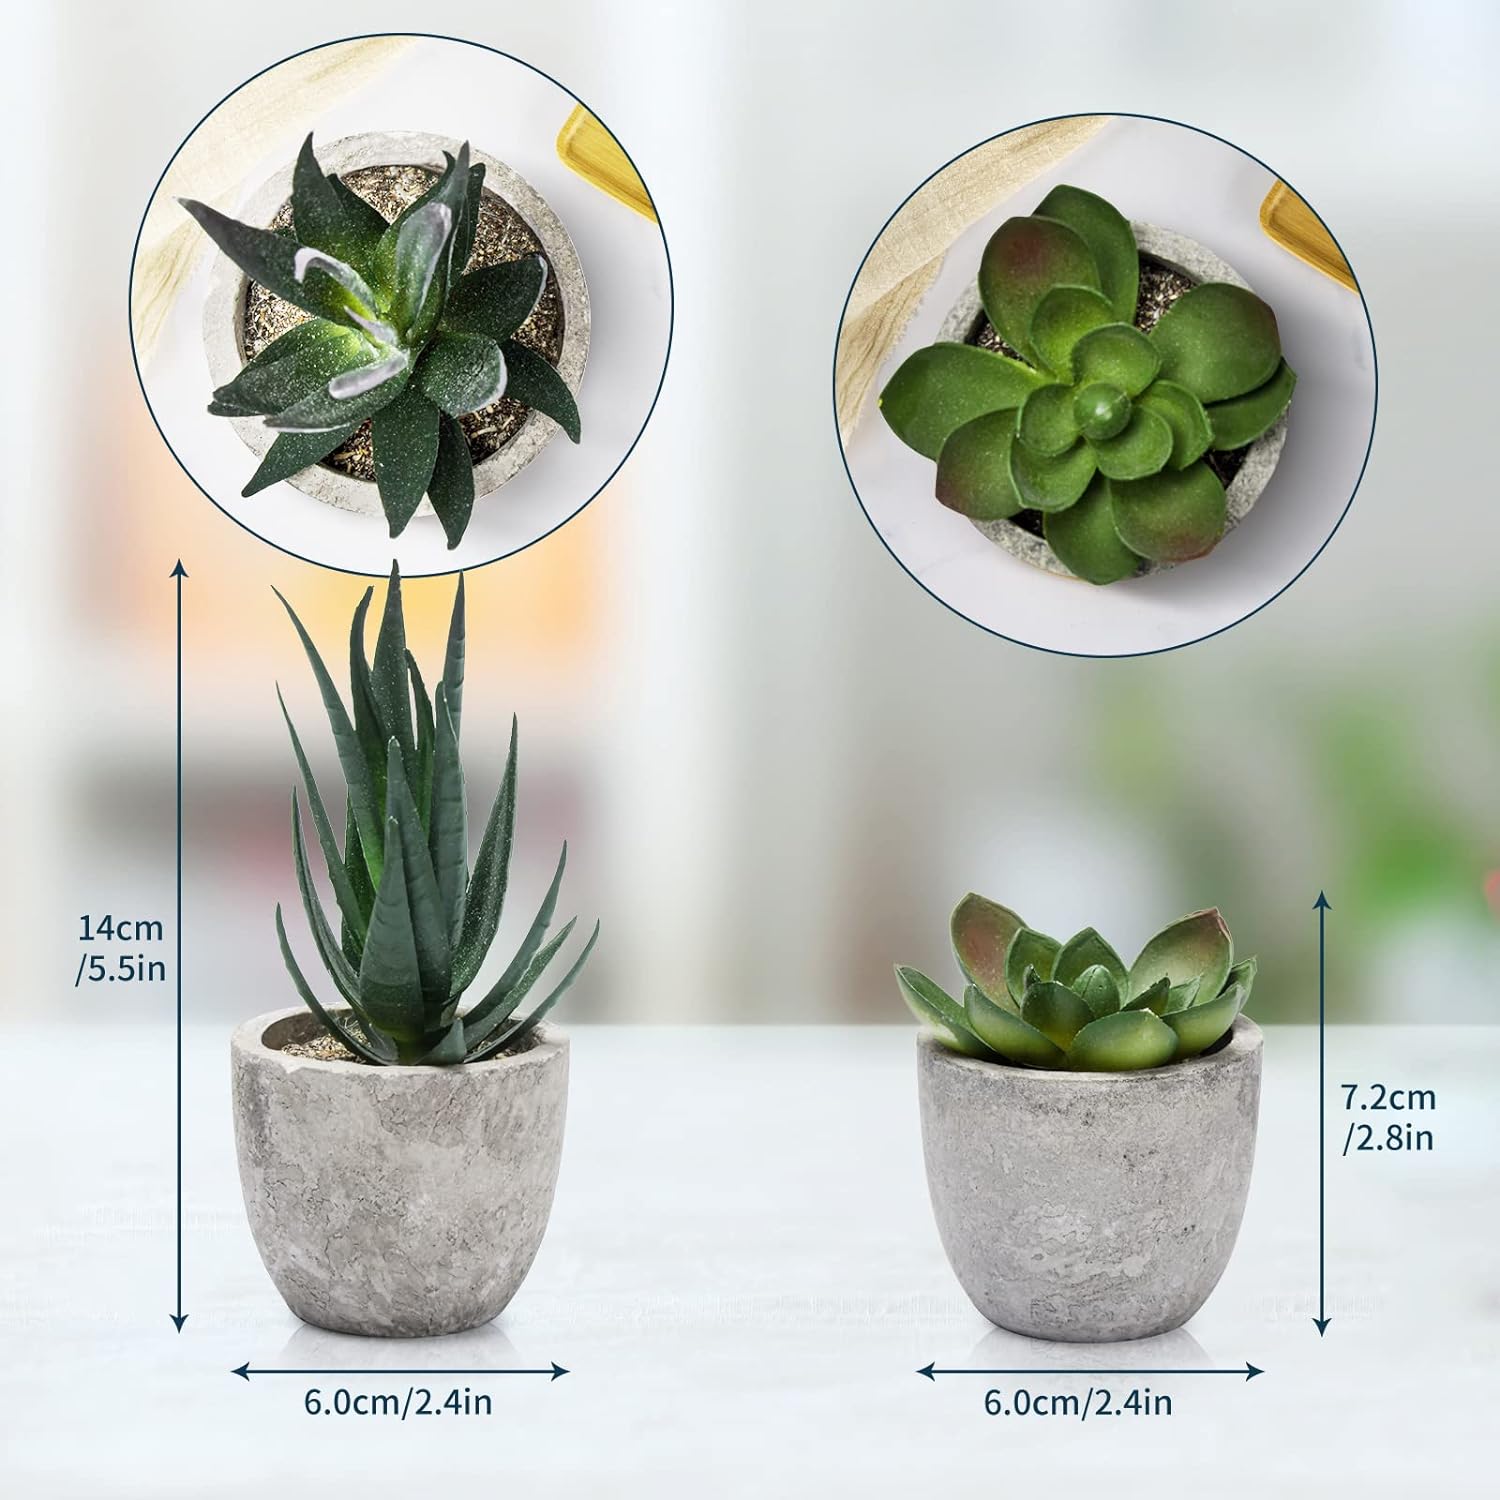 4 Set Artificial Plants Indoors in Pots Plastic Potted, Eucalyptus, Rosemary, Small Fake Succulents Faux Plants for Office Desk Bedroom Kitchen House Decoration